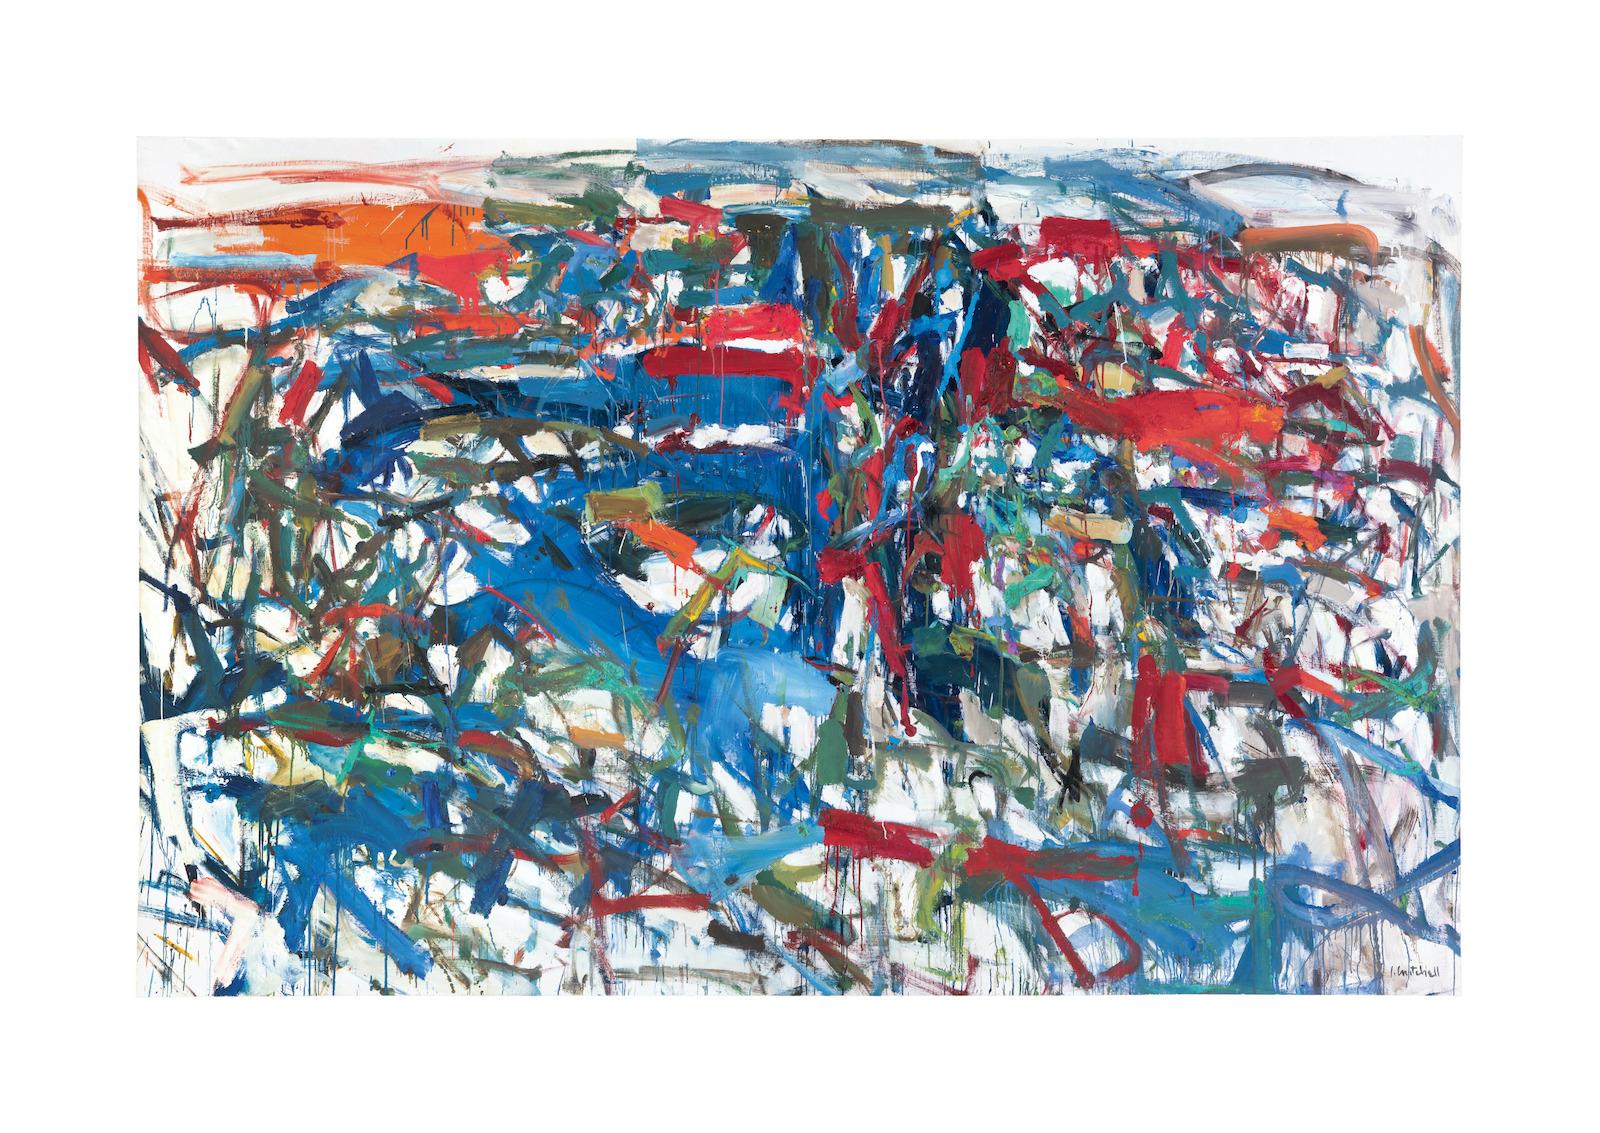 Joan Mitchell, To the Harbormaster, 1957.